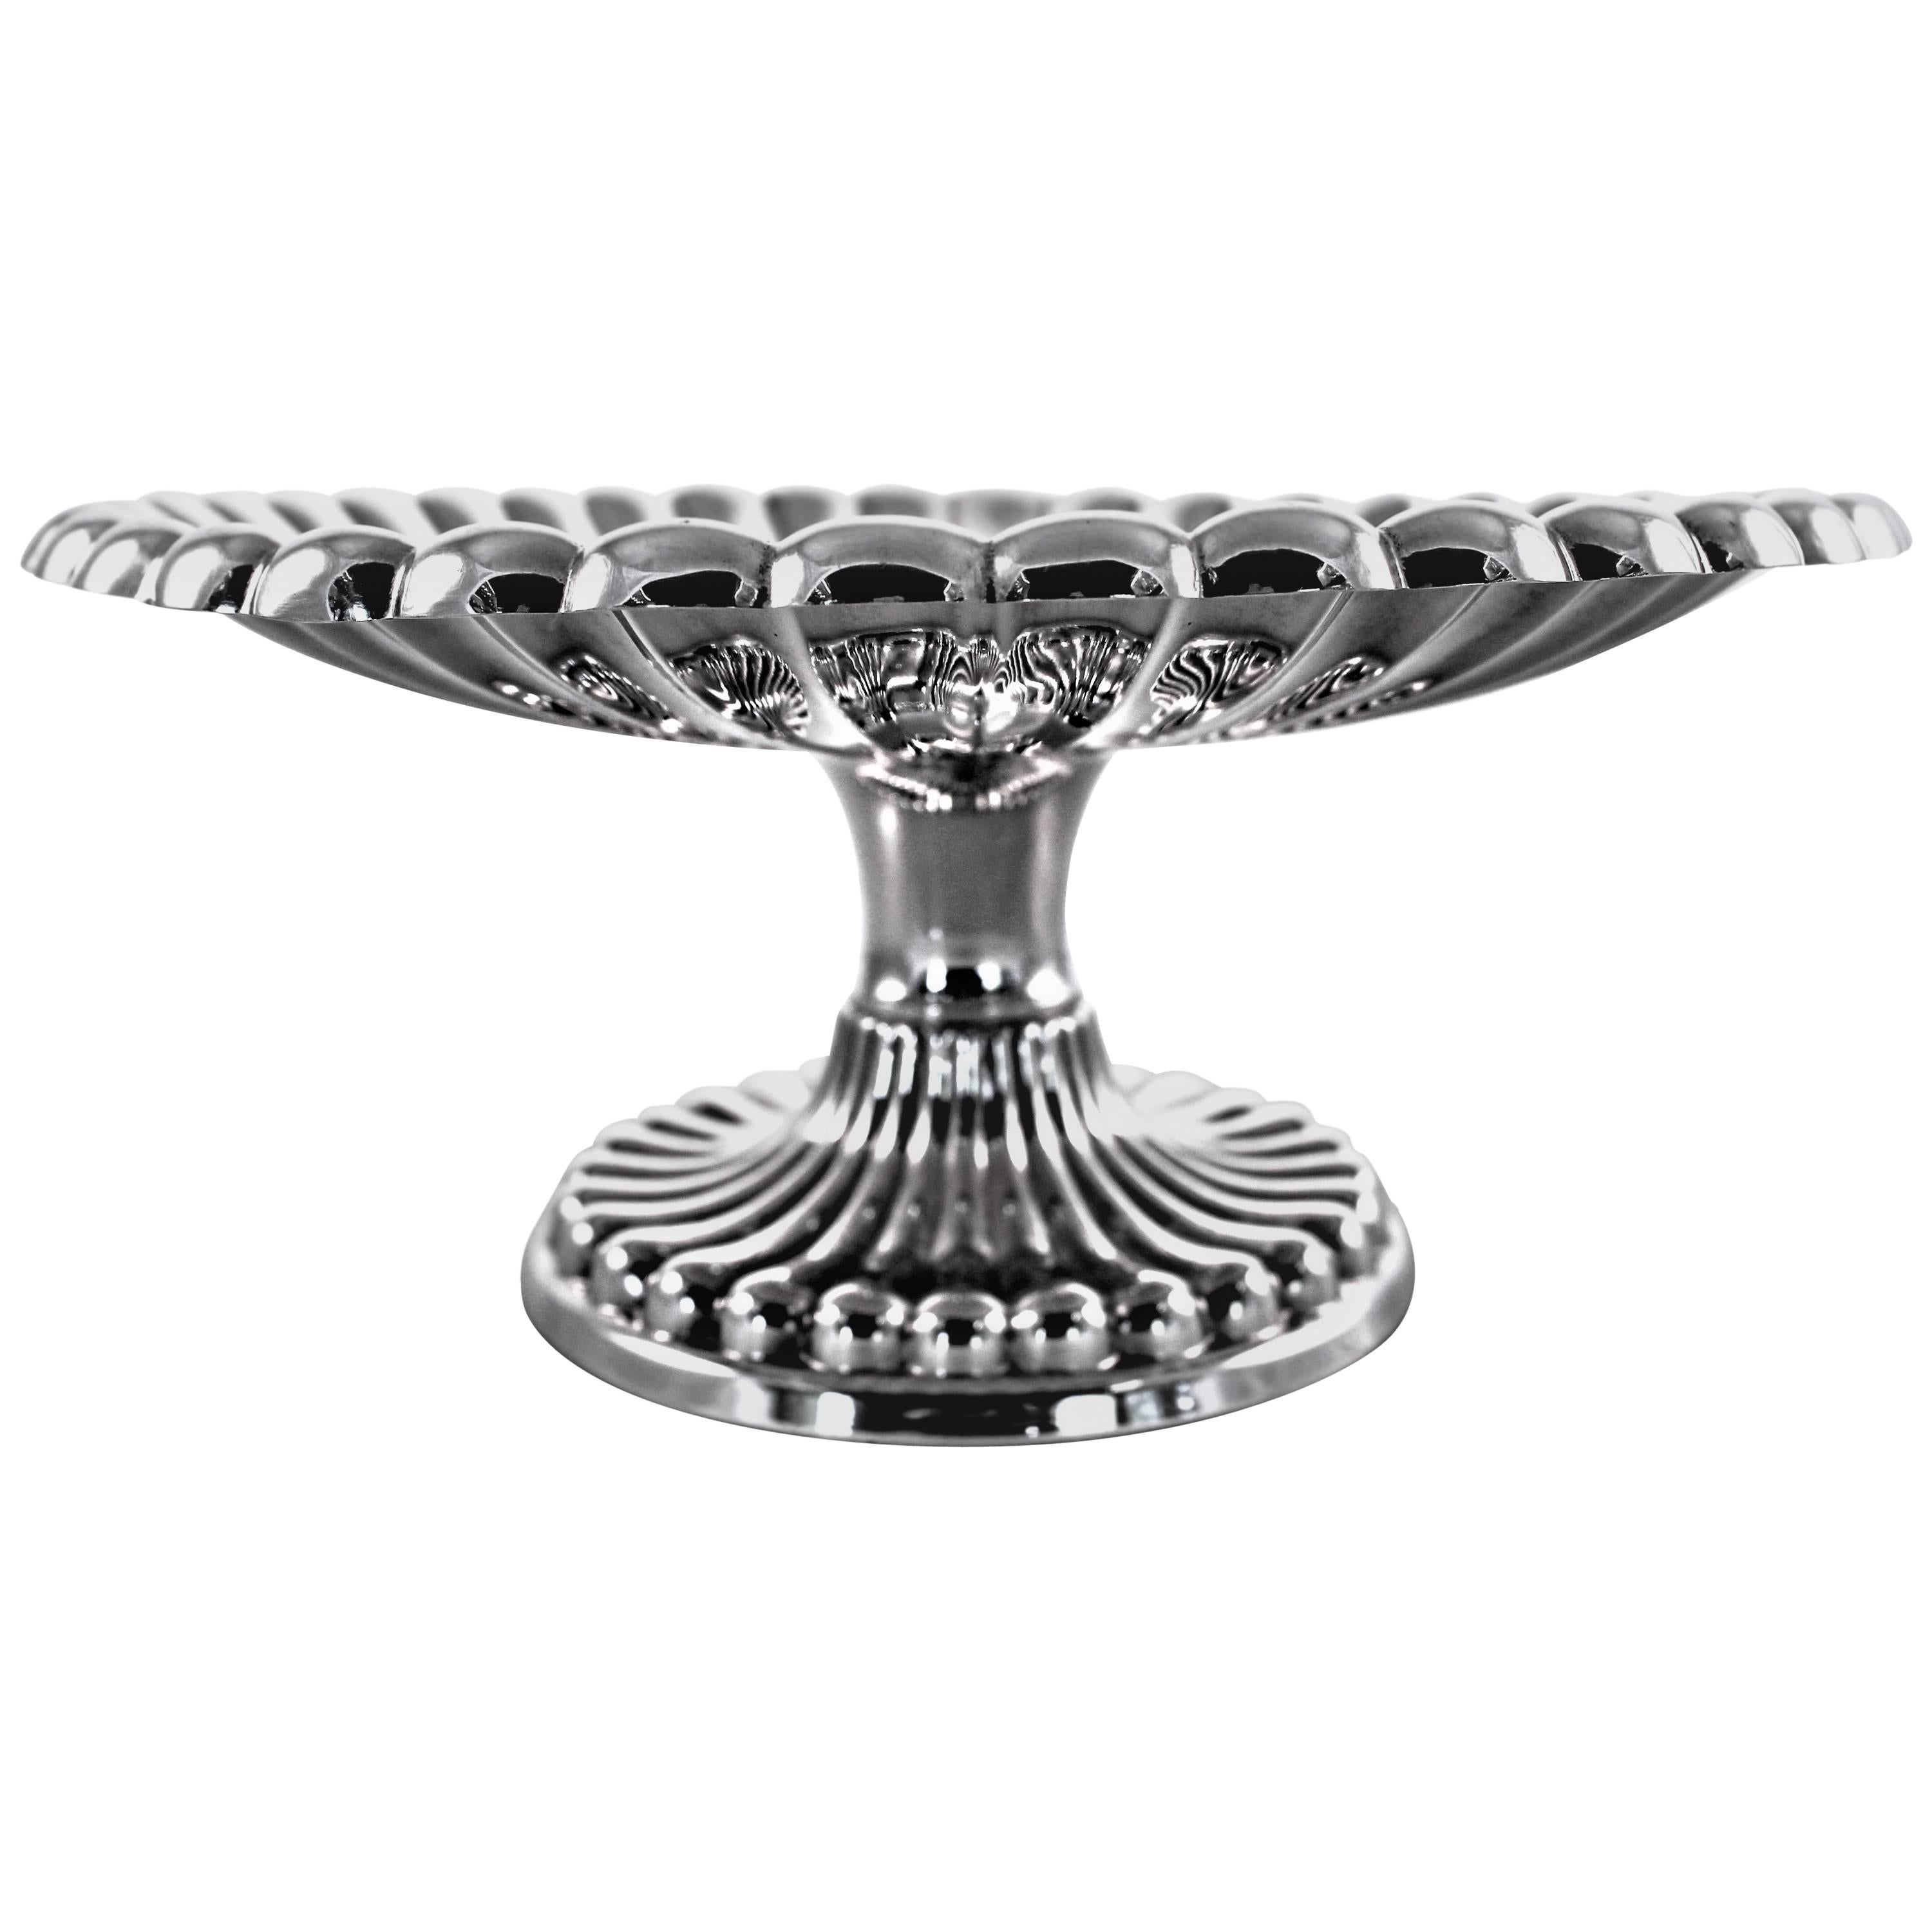 Sterling Silver Cake Plate, 1932